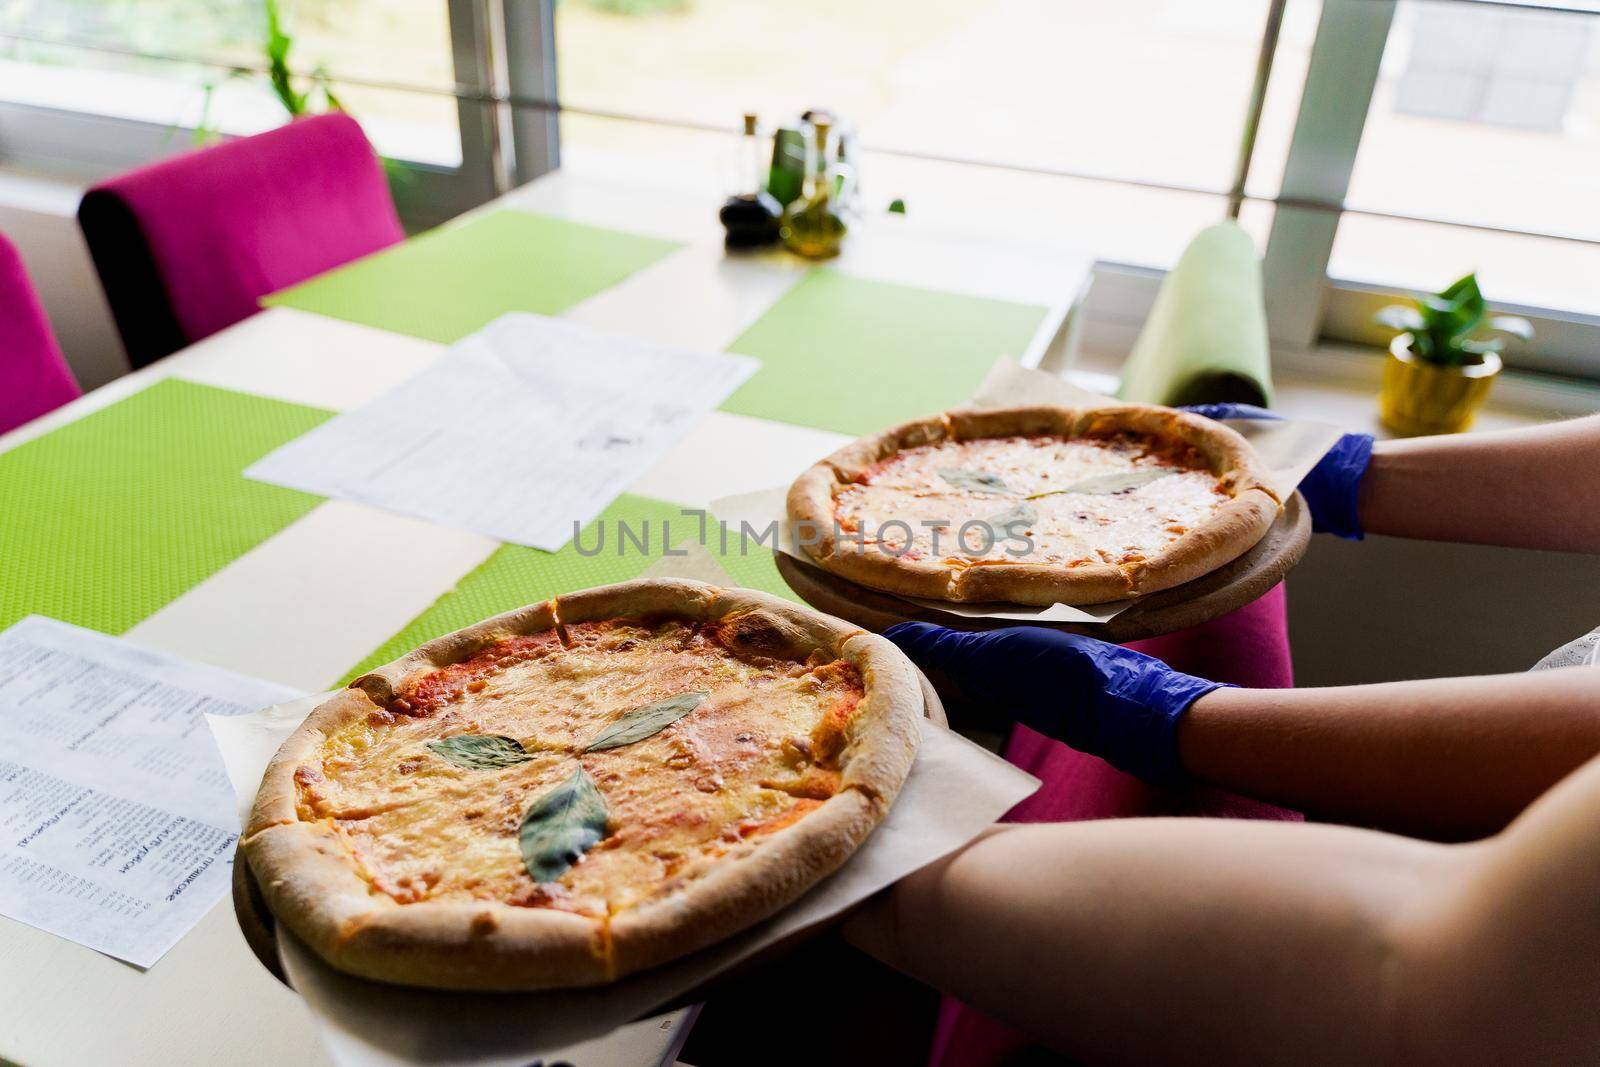 Pizza with tomatoes, mozzarella cheese, basil. Waiter with gloves takes out margarita pizza.